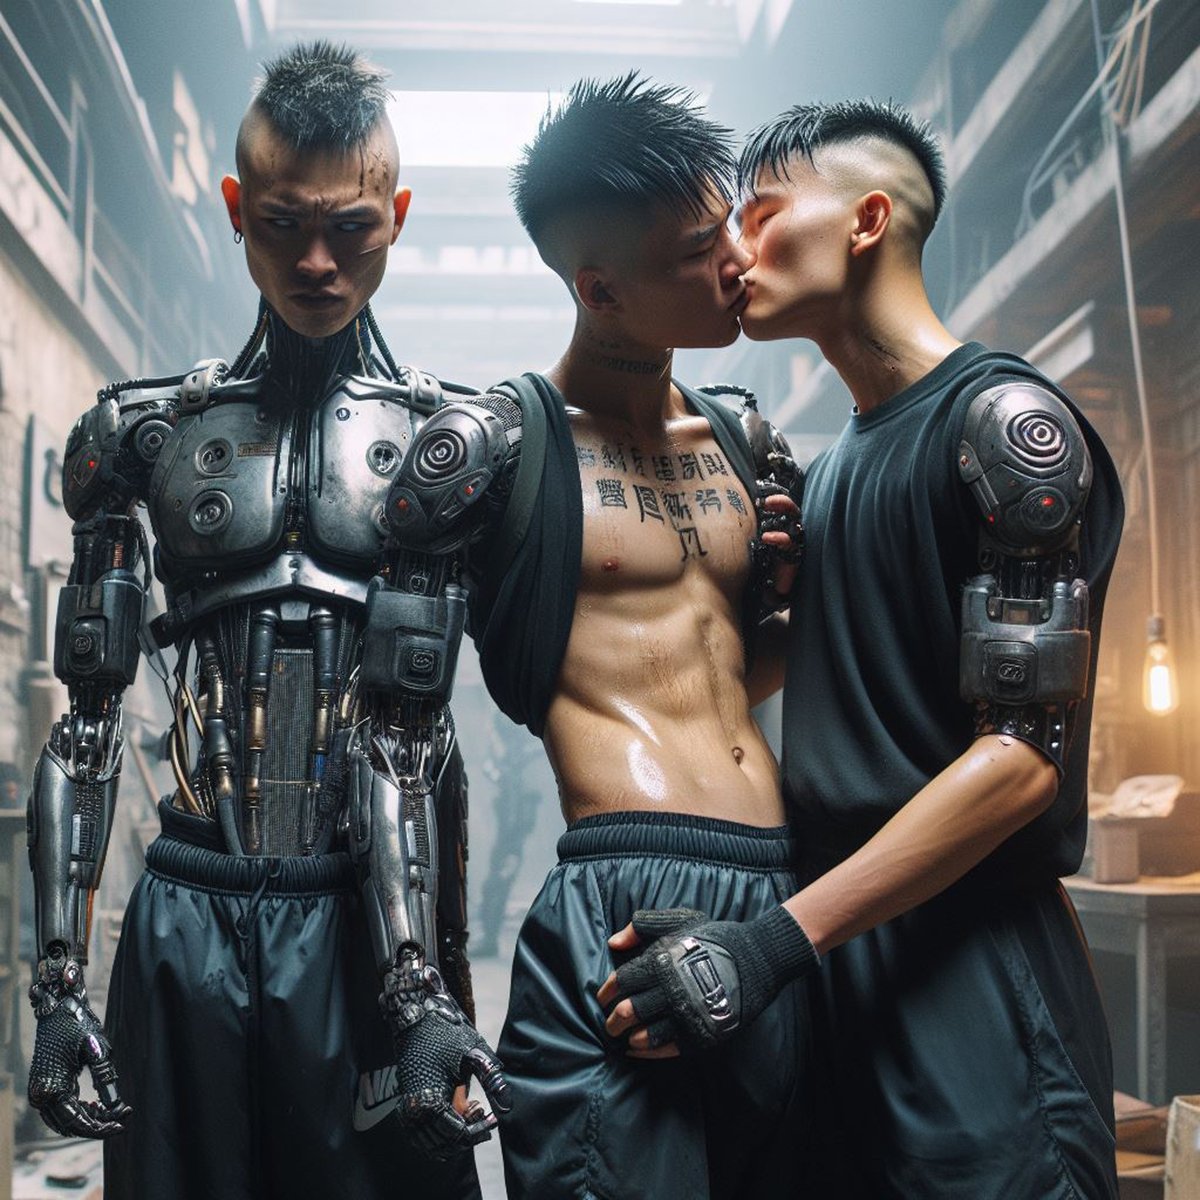 Fun with the cyborgs.

@cyberhoodboy #cyborg #cyborgs #robot #robots #androids #tracksuits #tracksuitfetish #scally #gayscally